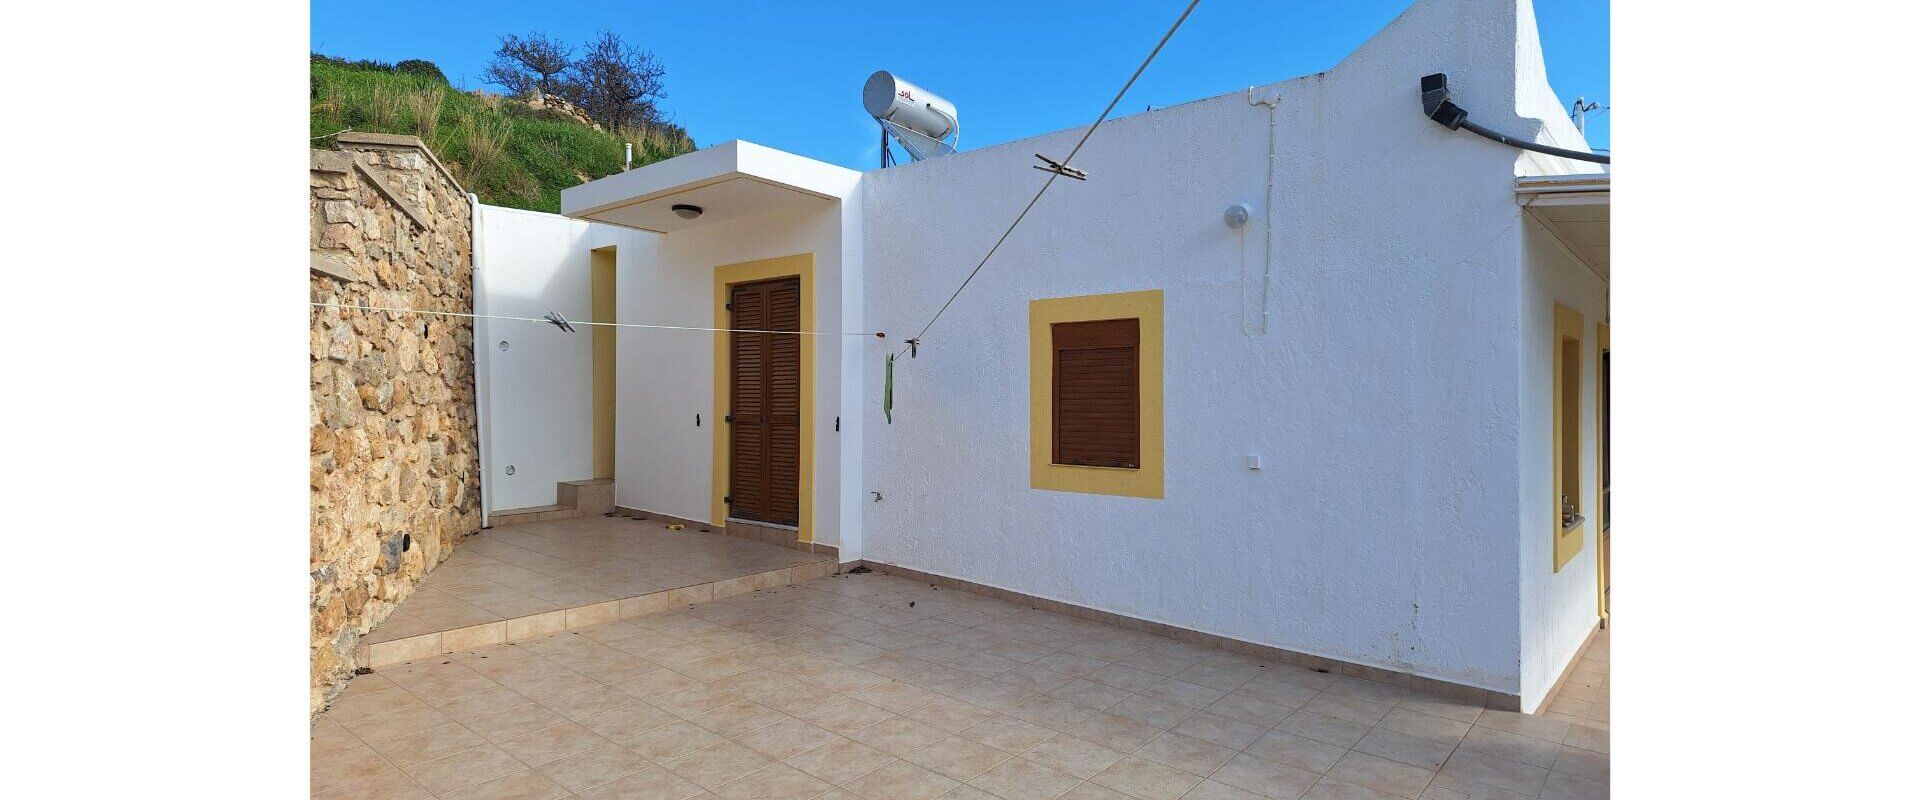 House for sale Xerocampos L 804